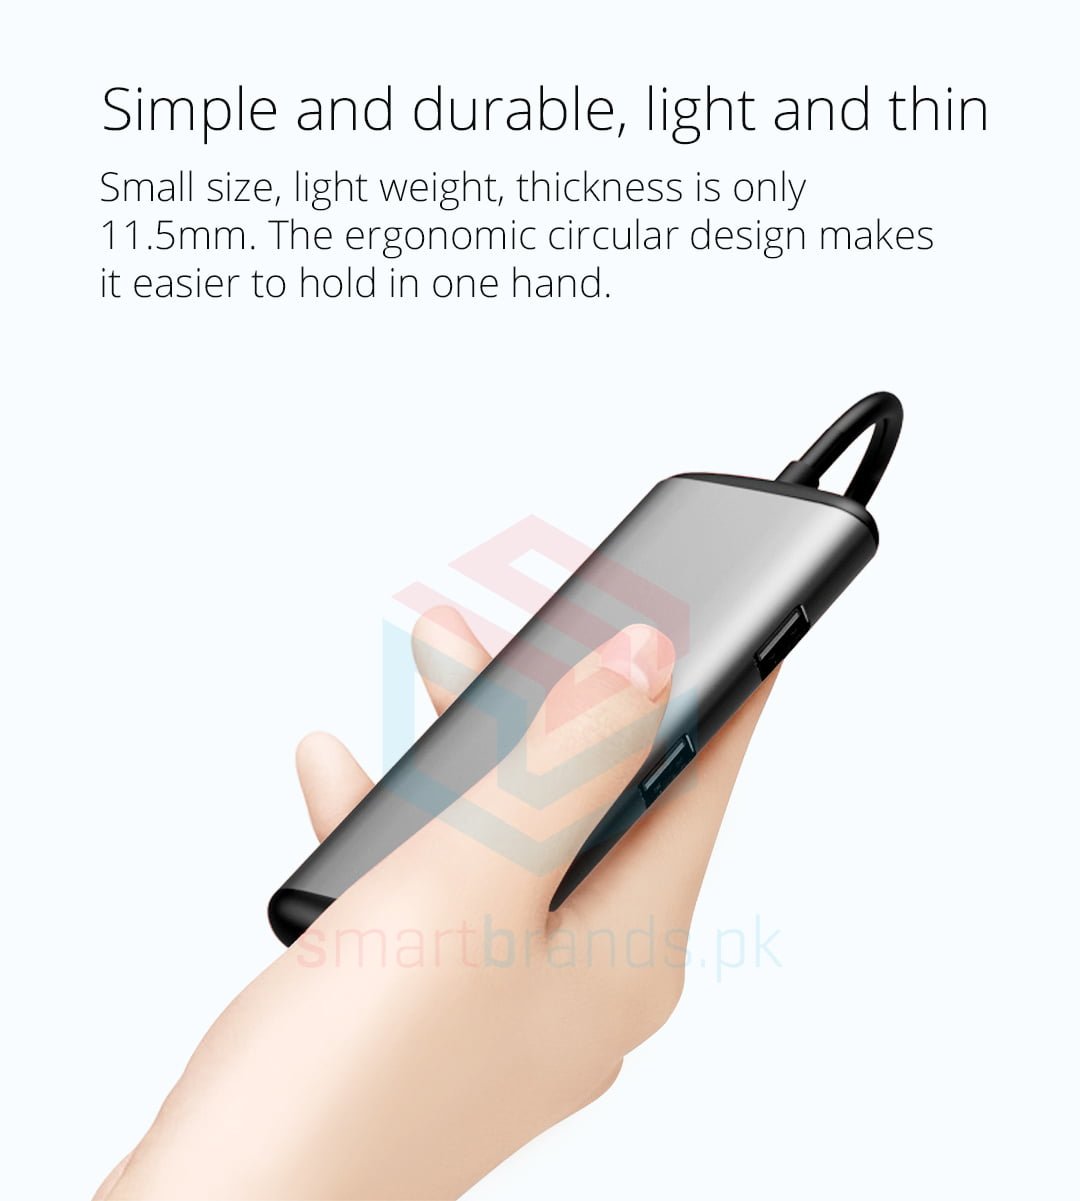 Simple and durable, light and thin. Small size, light weight, thickness is only 11.5mm. The ergonomic circular design makes it easier to hold in one hand.